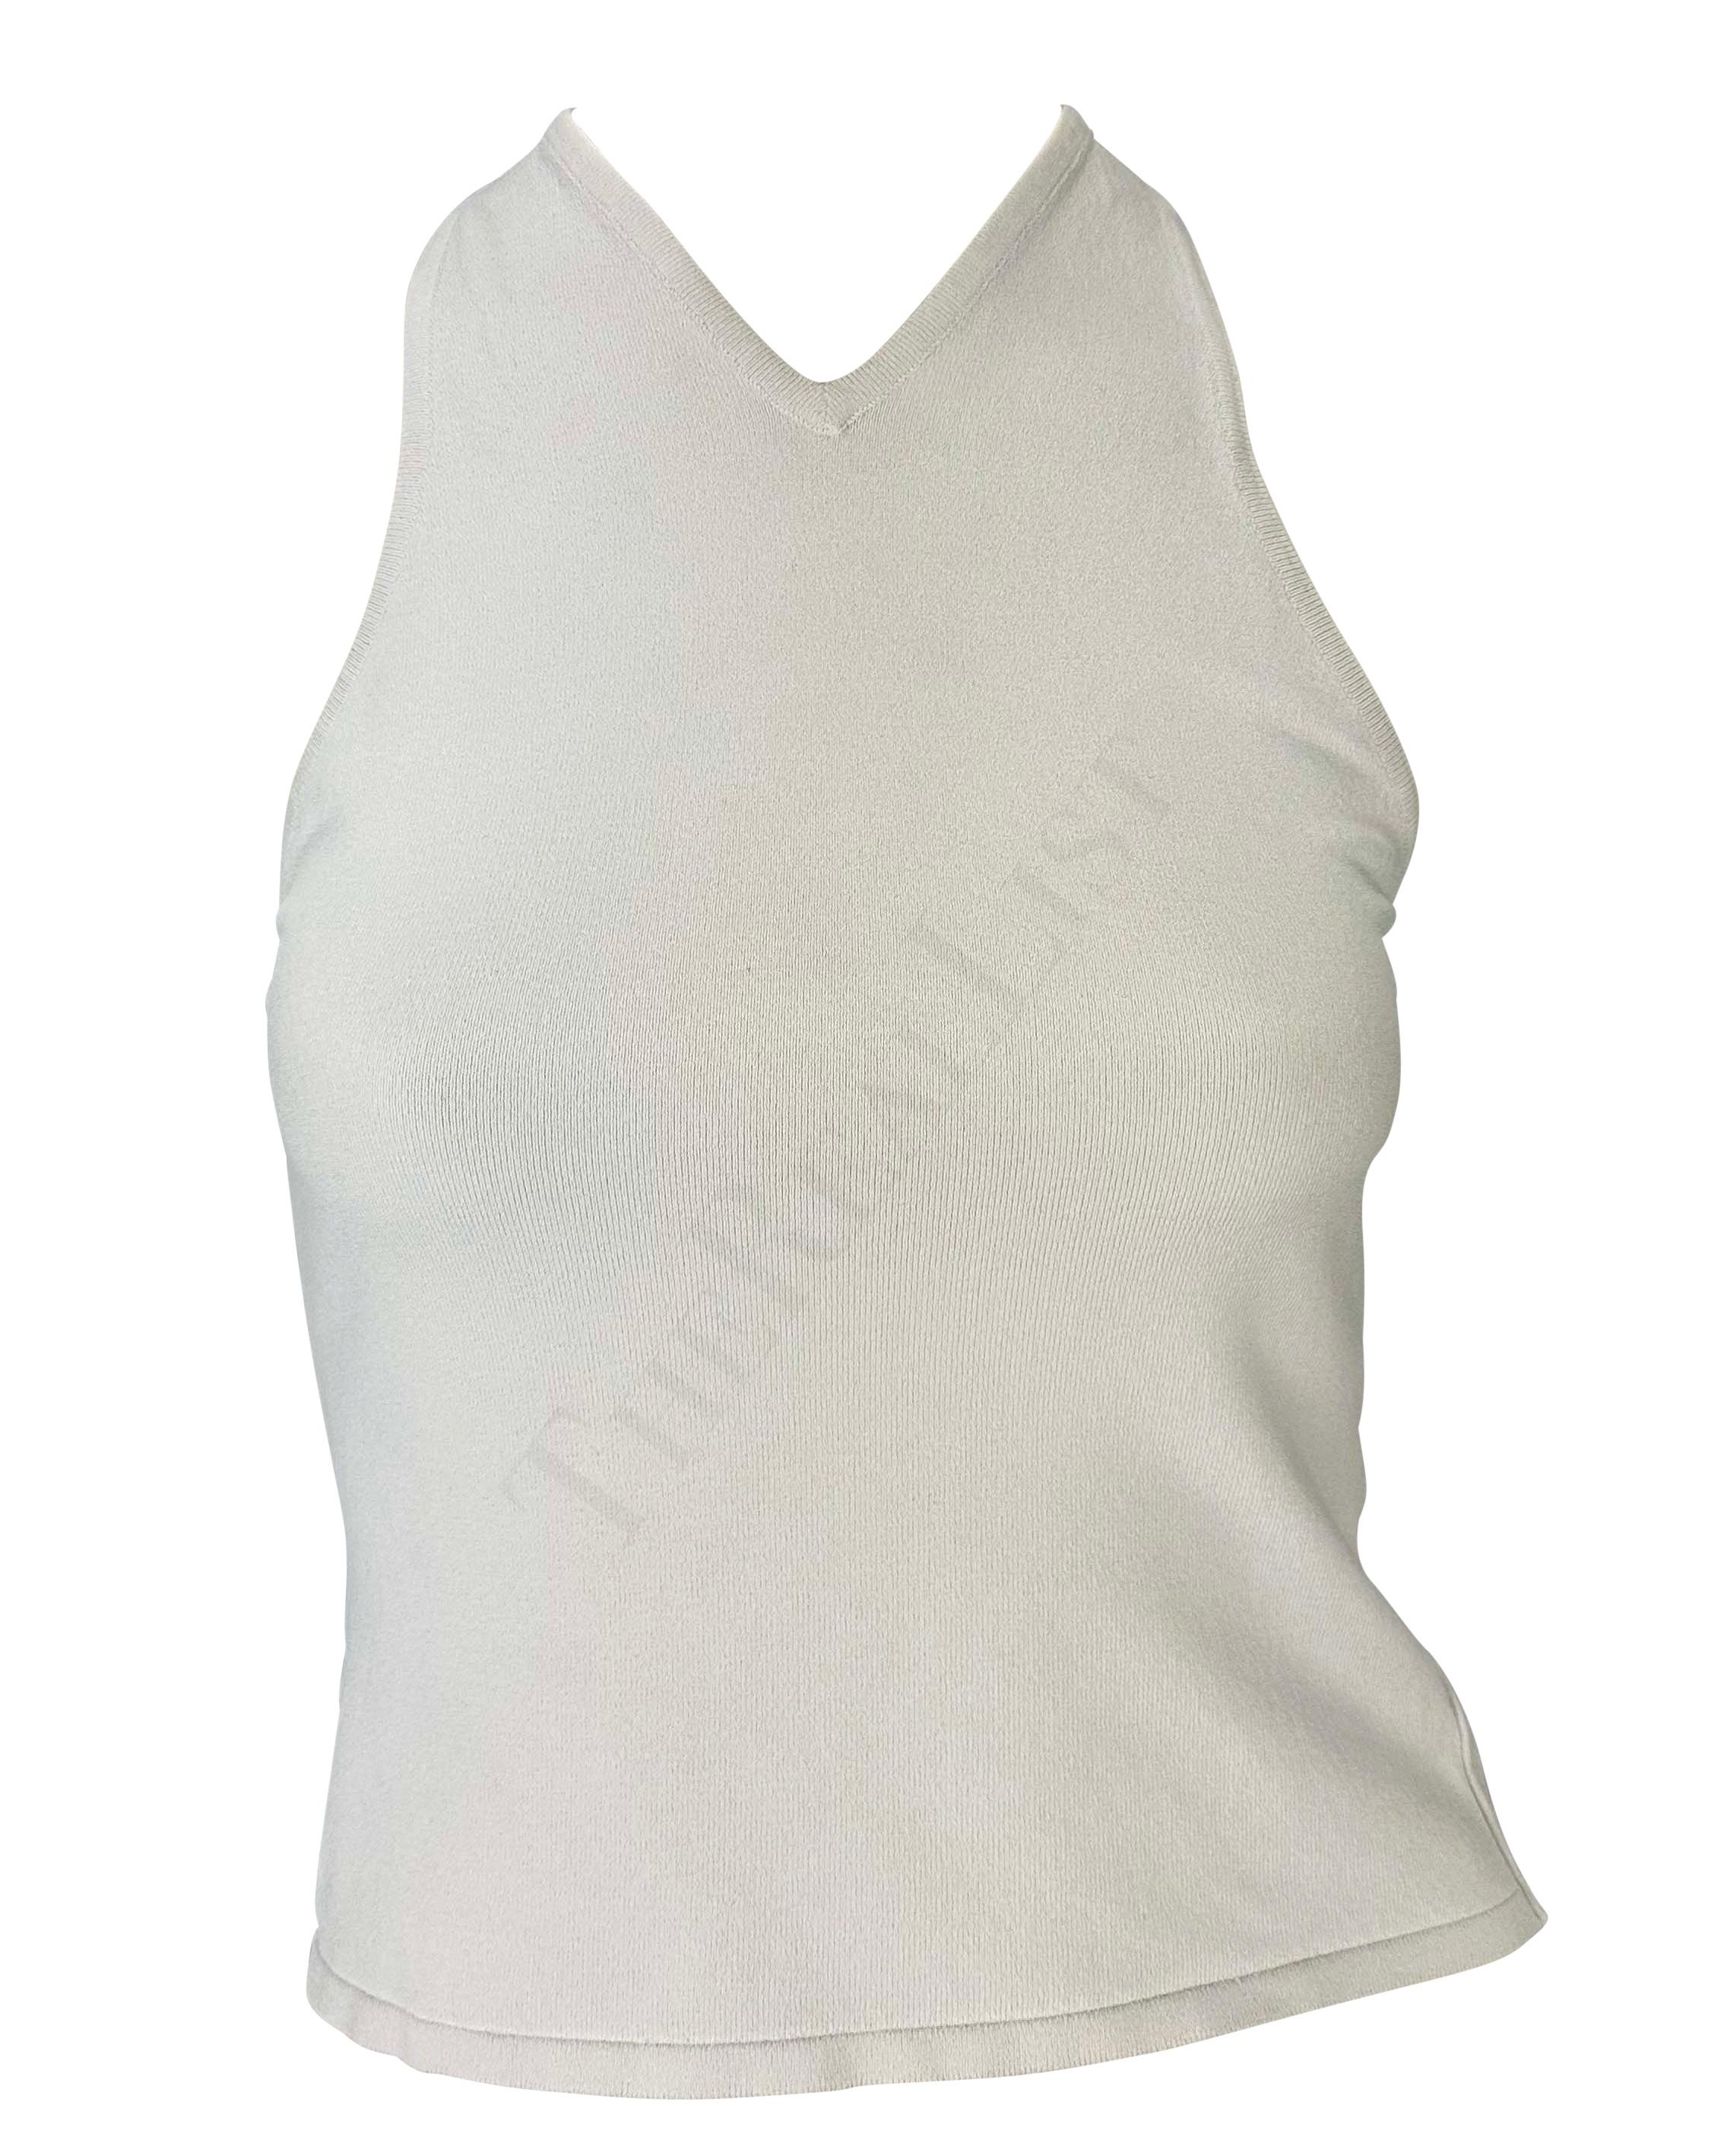 Women's S/S 1998 Gucci by Tom Ford White Stretch Knit Racerback Tank Top